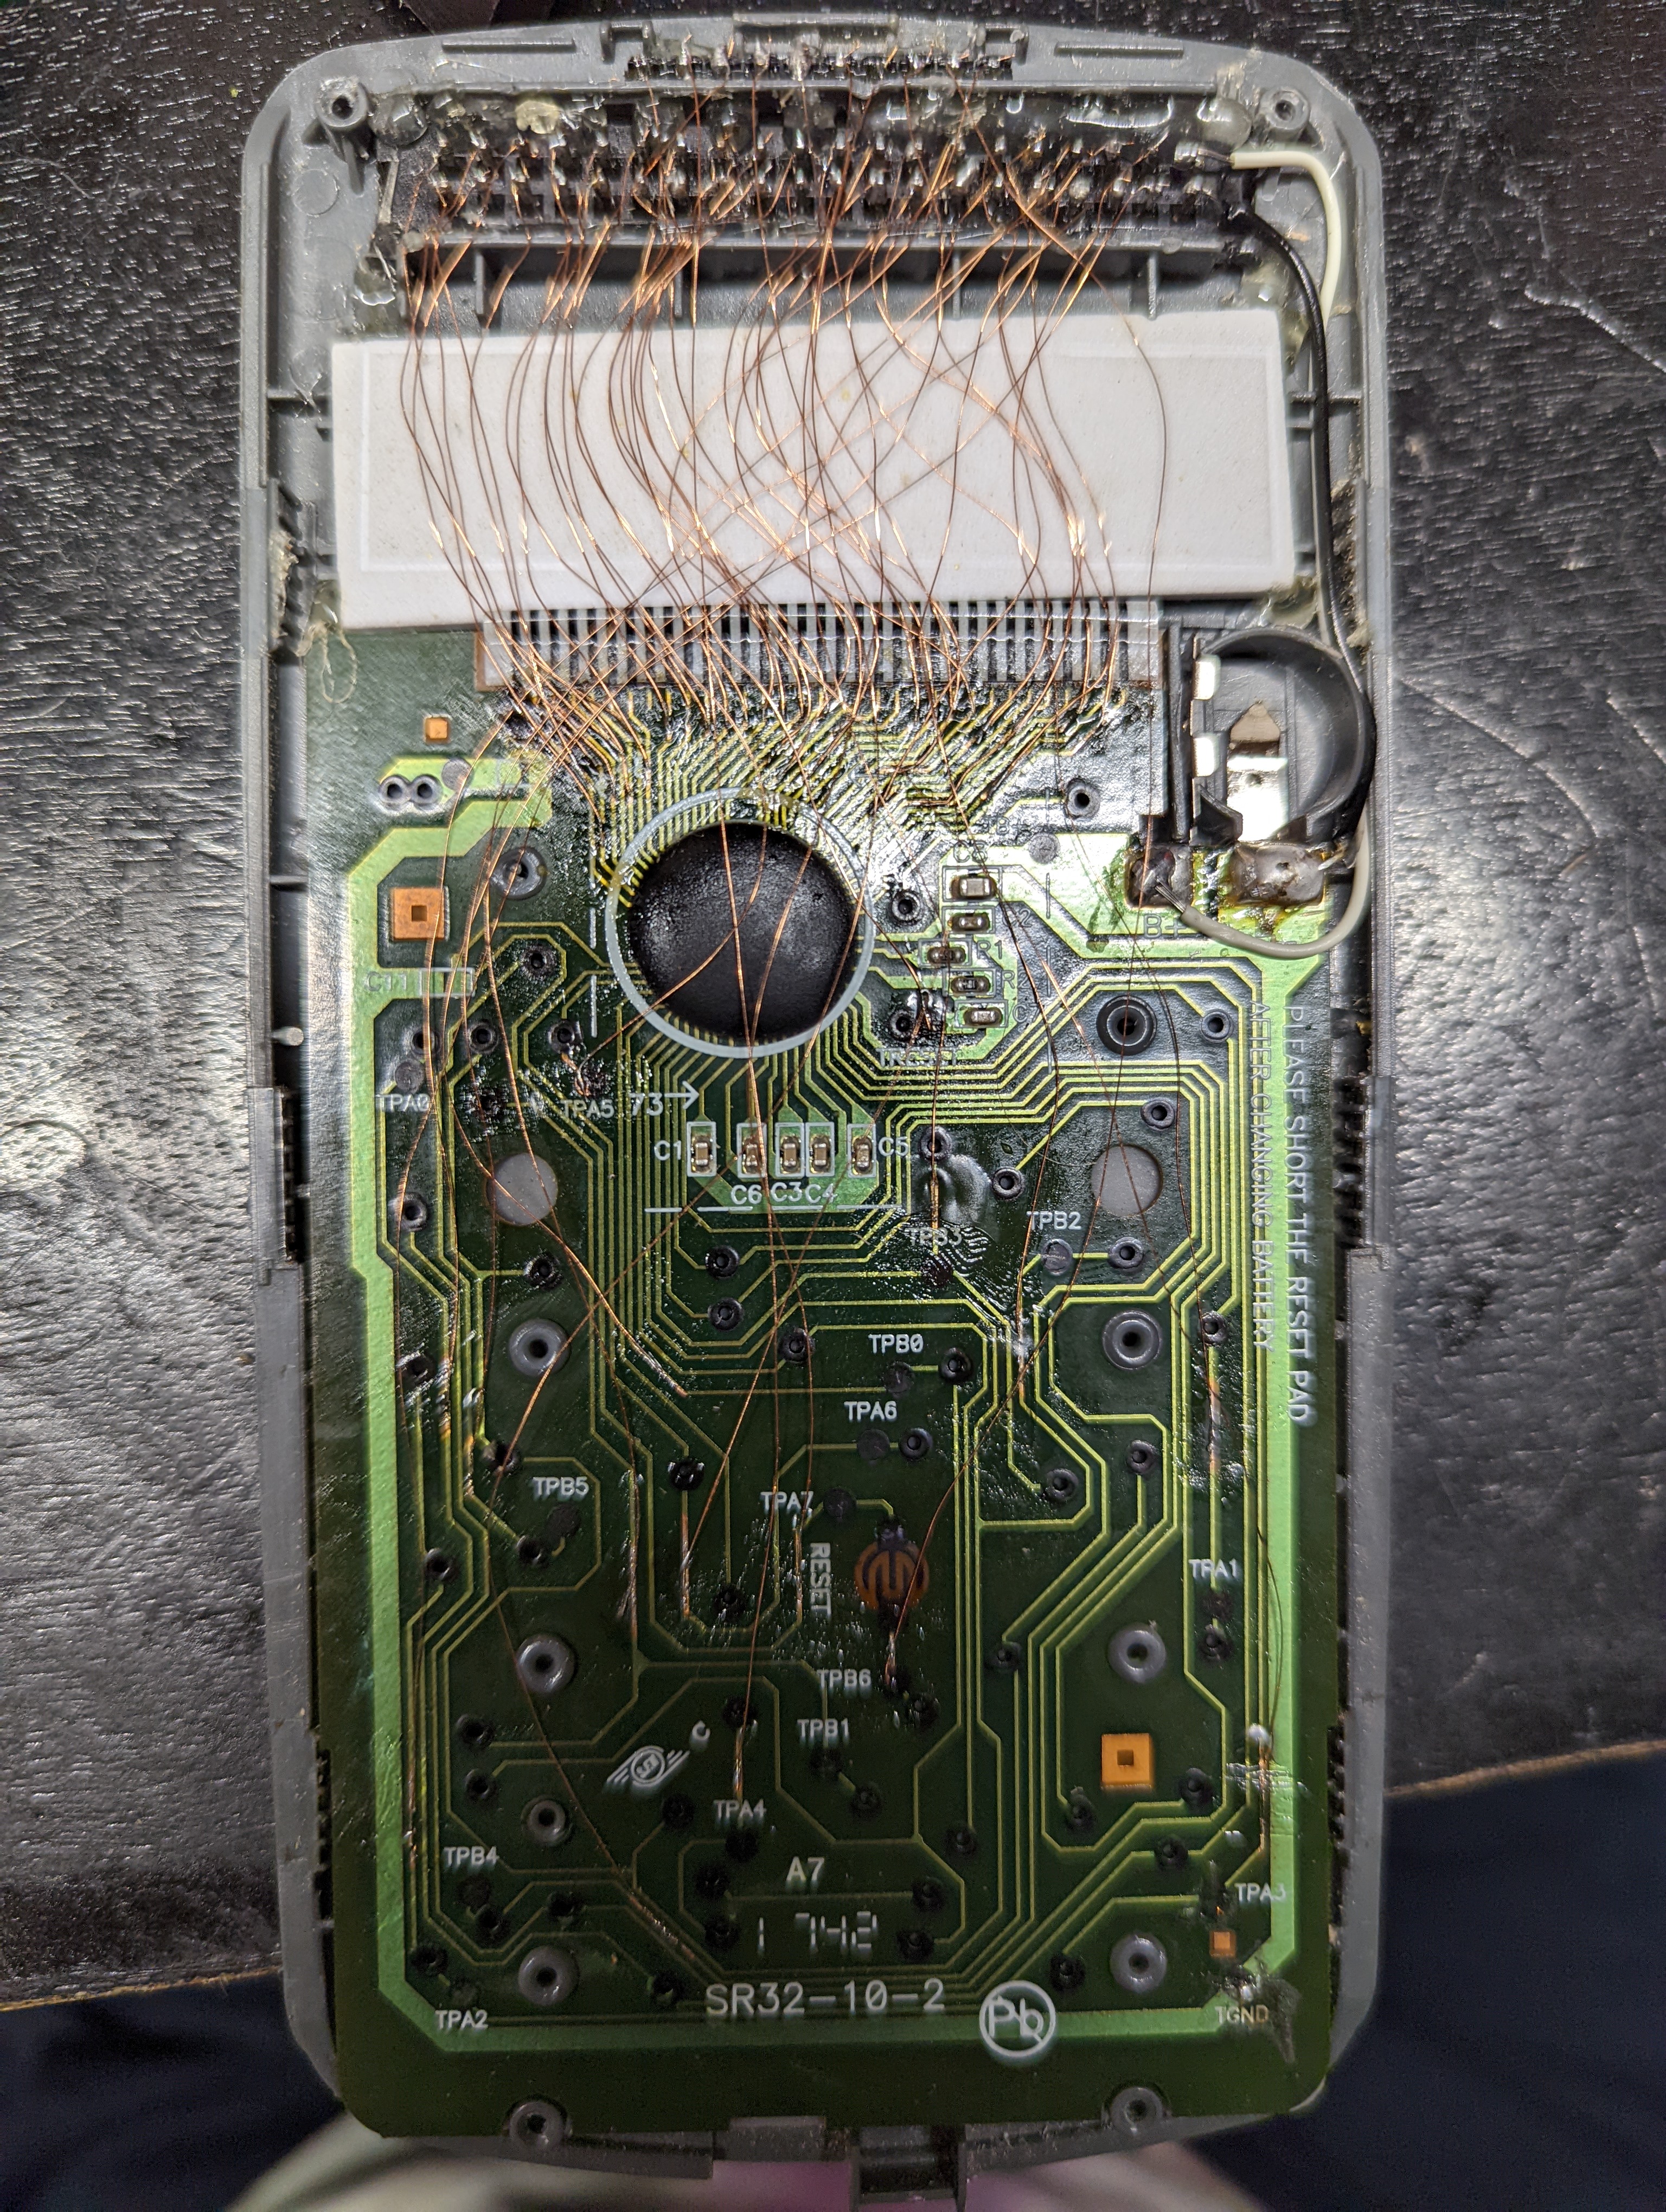 a picture of the inside of the calculator after it was modified